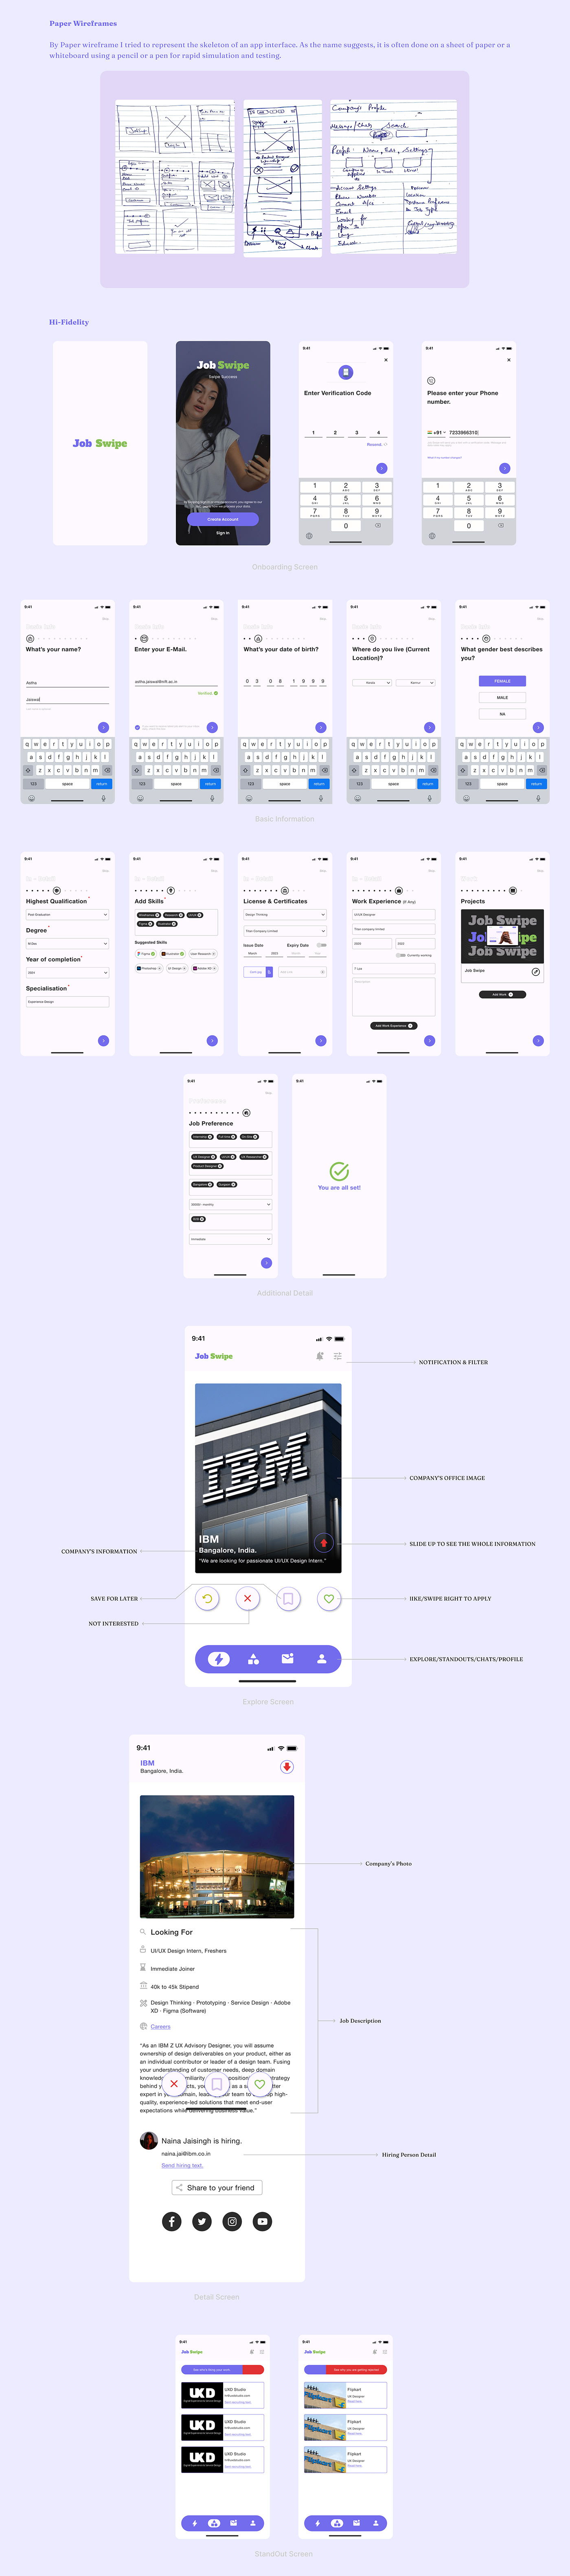 Job Search product design  UI/UX user interface Mobile Application UX design Case Study user experience Figma Mobile app